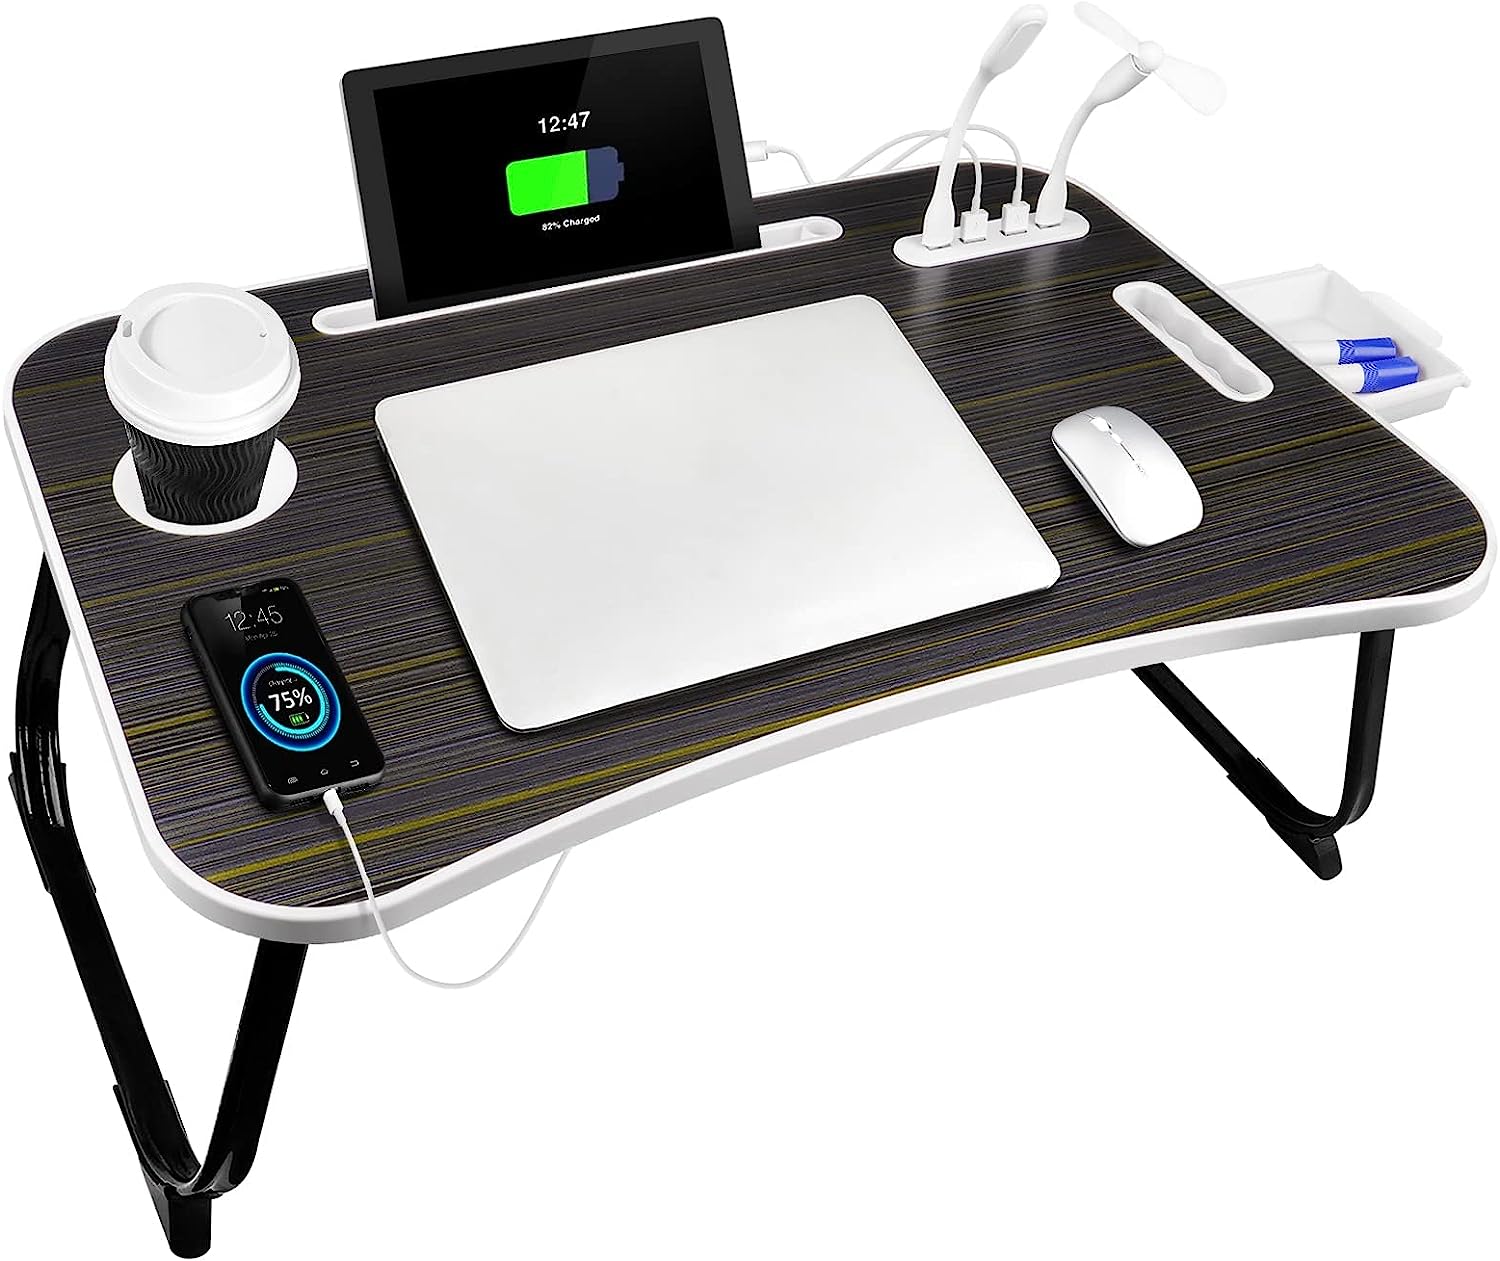 Laptop Bed Desk,Lap Desk Bed Table Tray with USB [...]